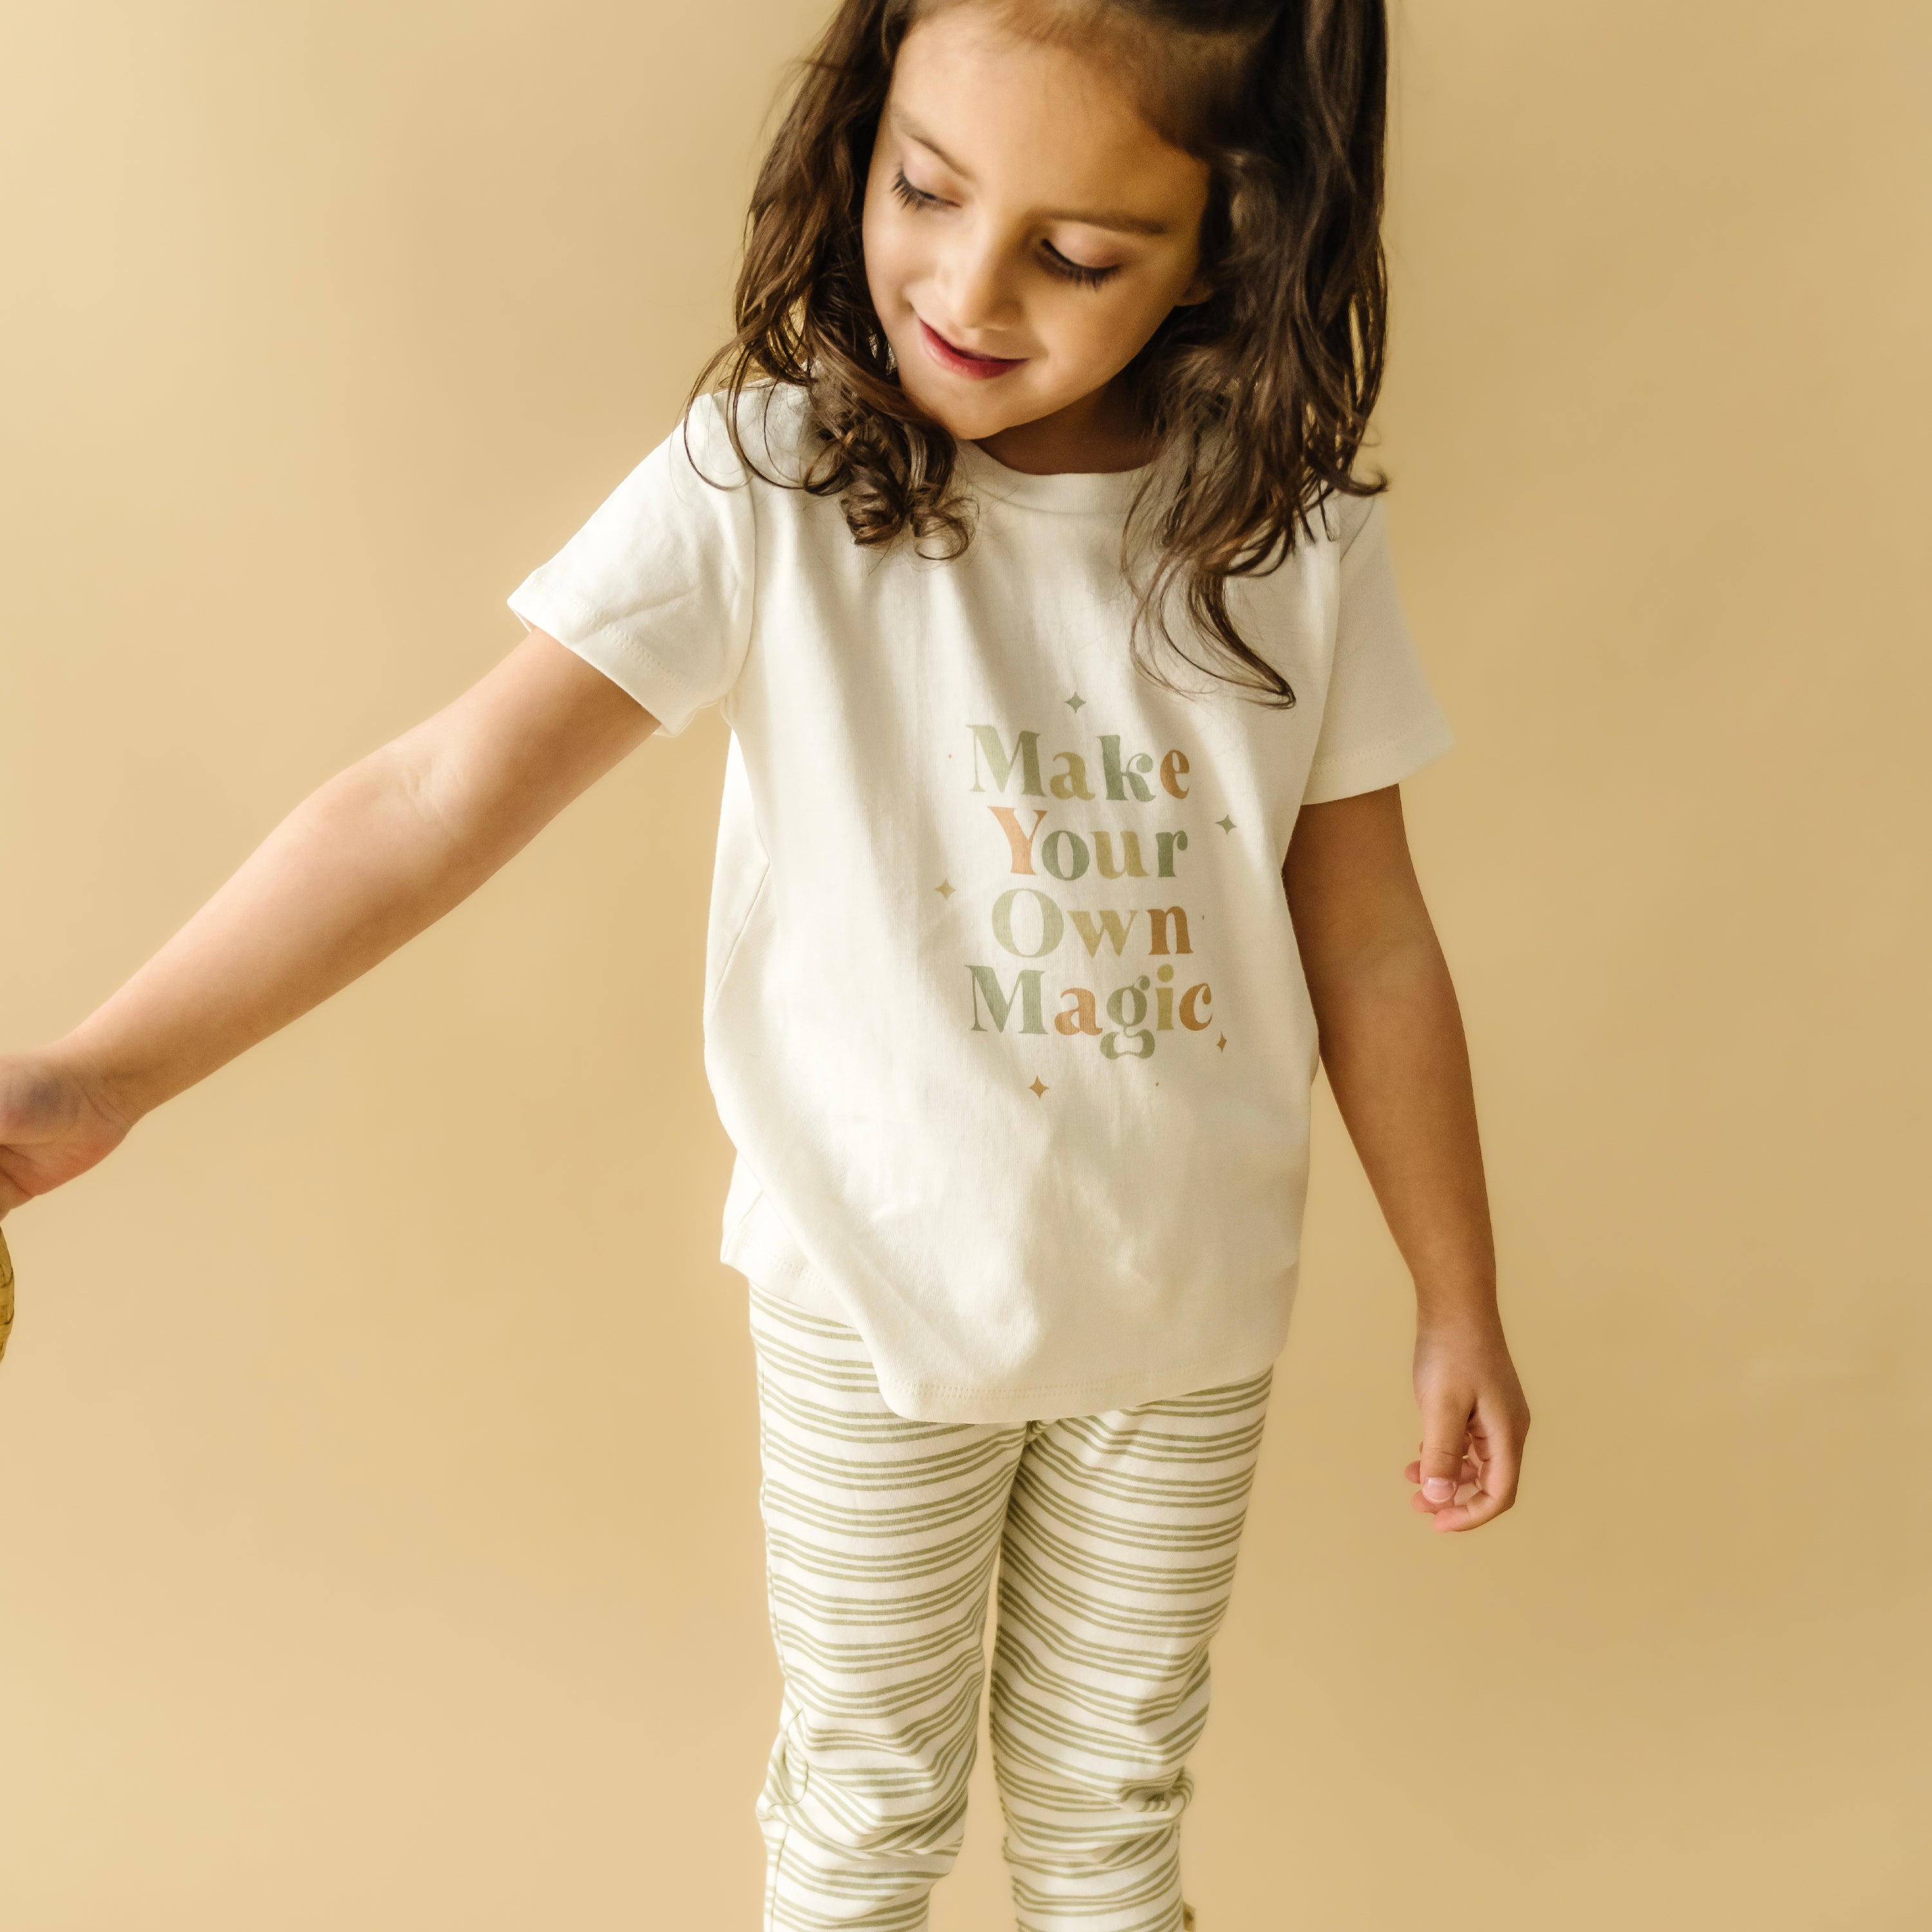 A young girl with dark hair wearing a white t-shirt from Organic Kids with the words "make your own magic" and striped pants looks downward with a content smile. She stands against a